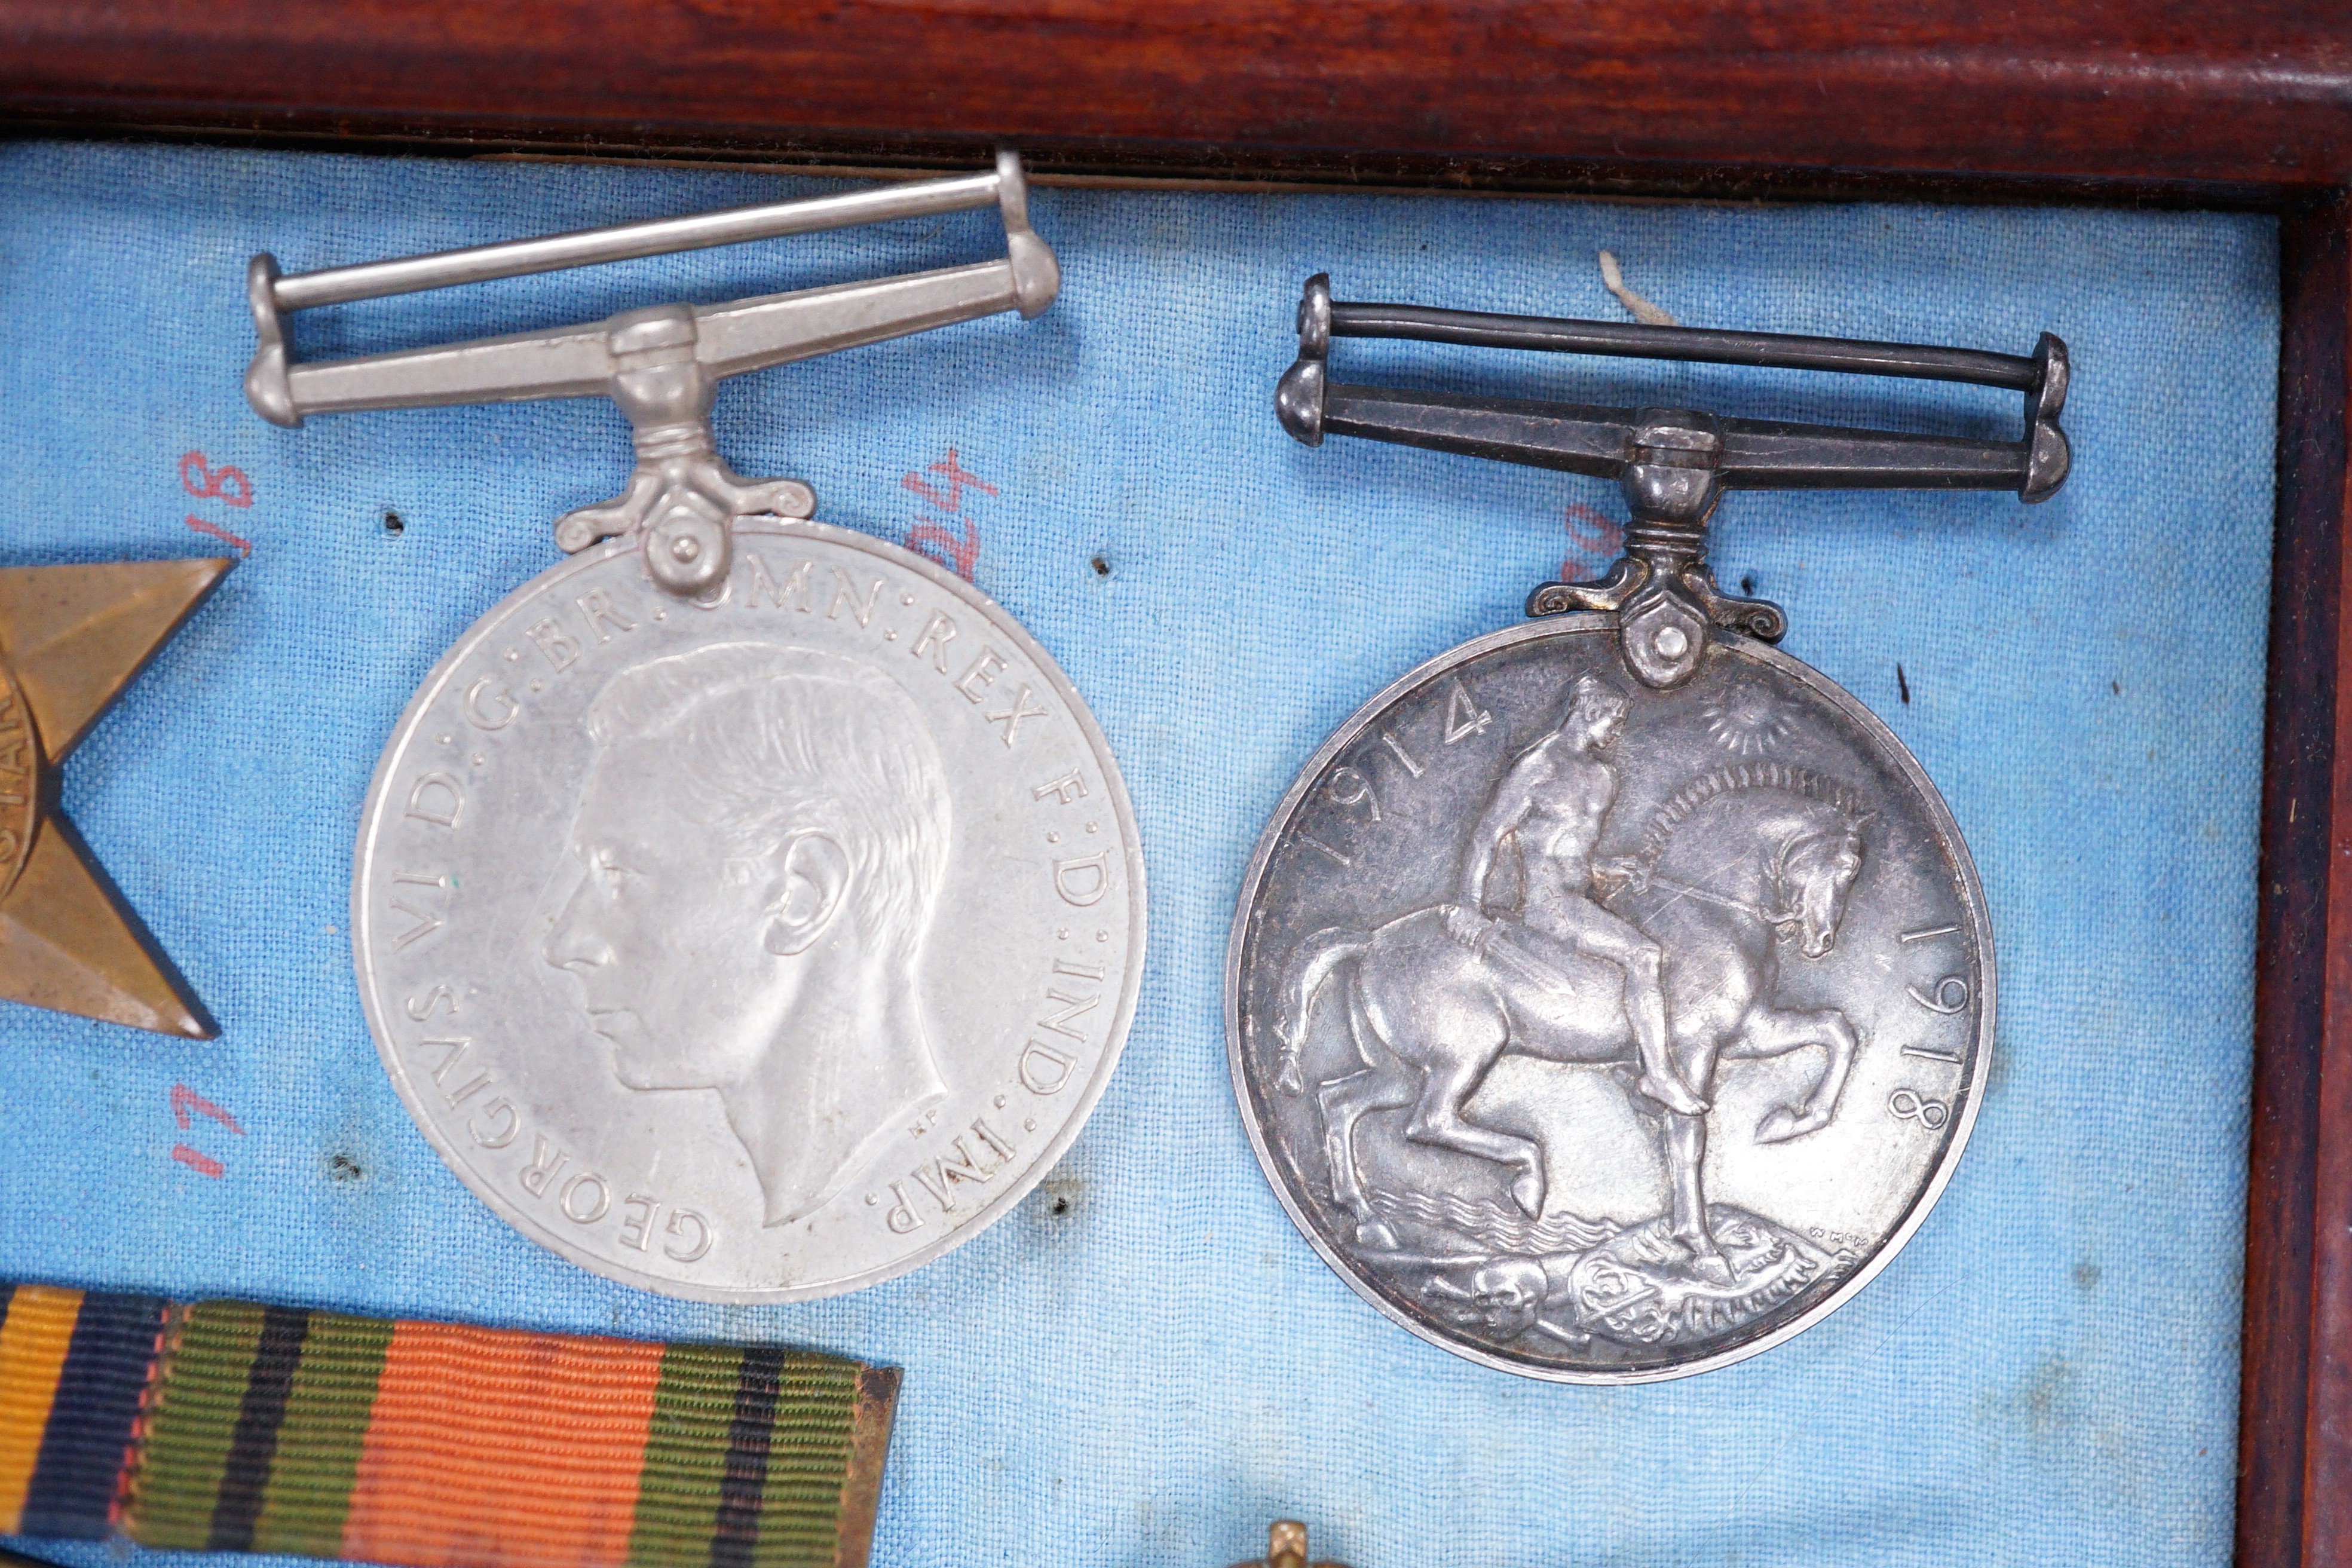 WWI and WWII medals, 11746 PTE. H. PEARCE. R. LANC. R.